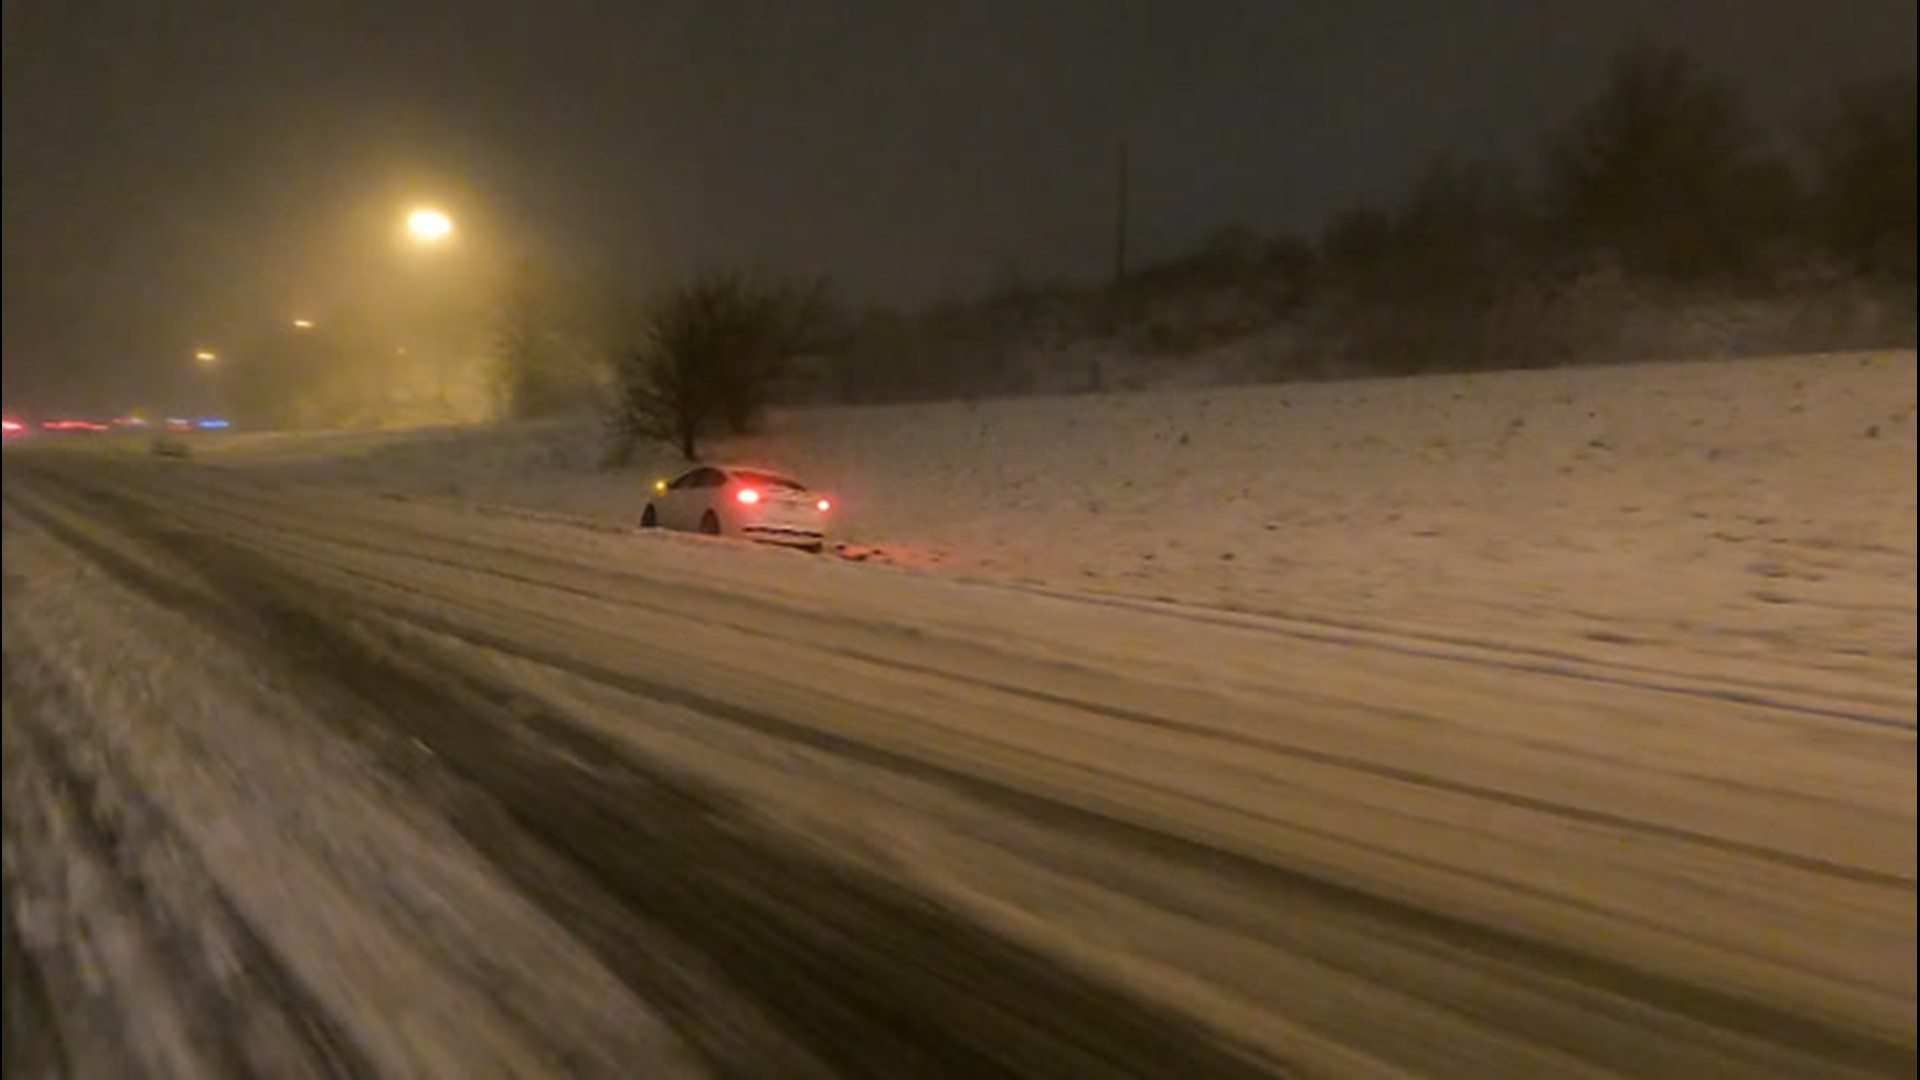 Snow blanketed Cleveland, Ohio, on Dec. 1, creating a headache for some drivers as roads became slick.